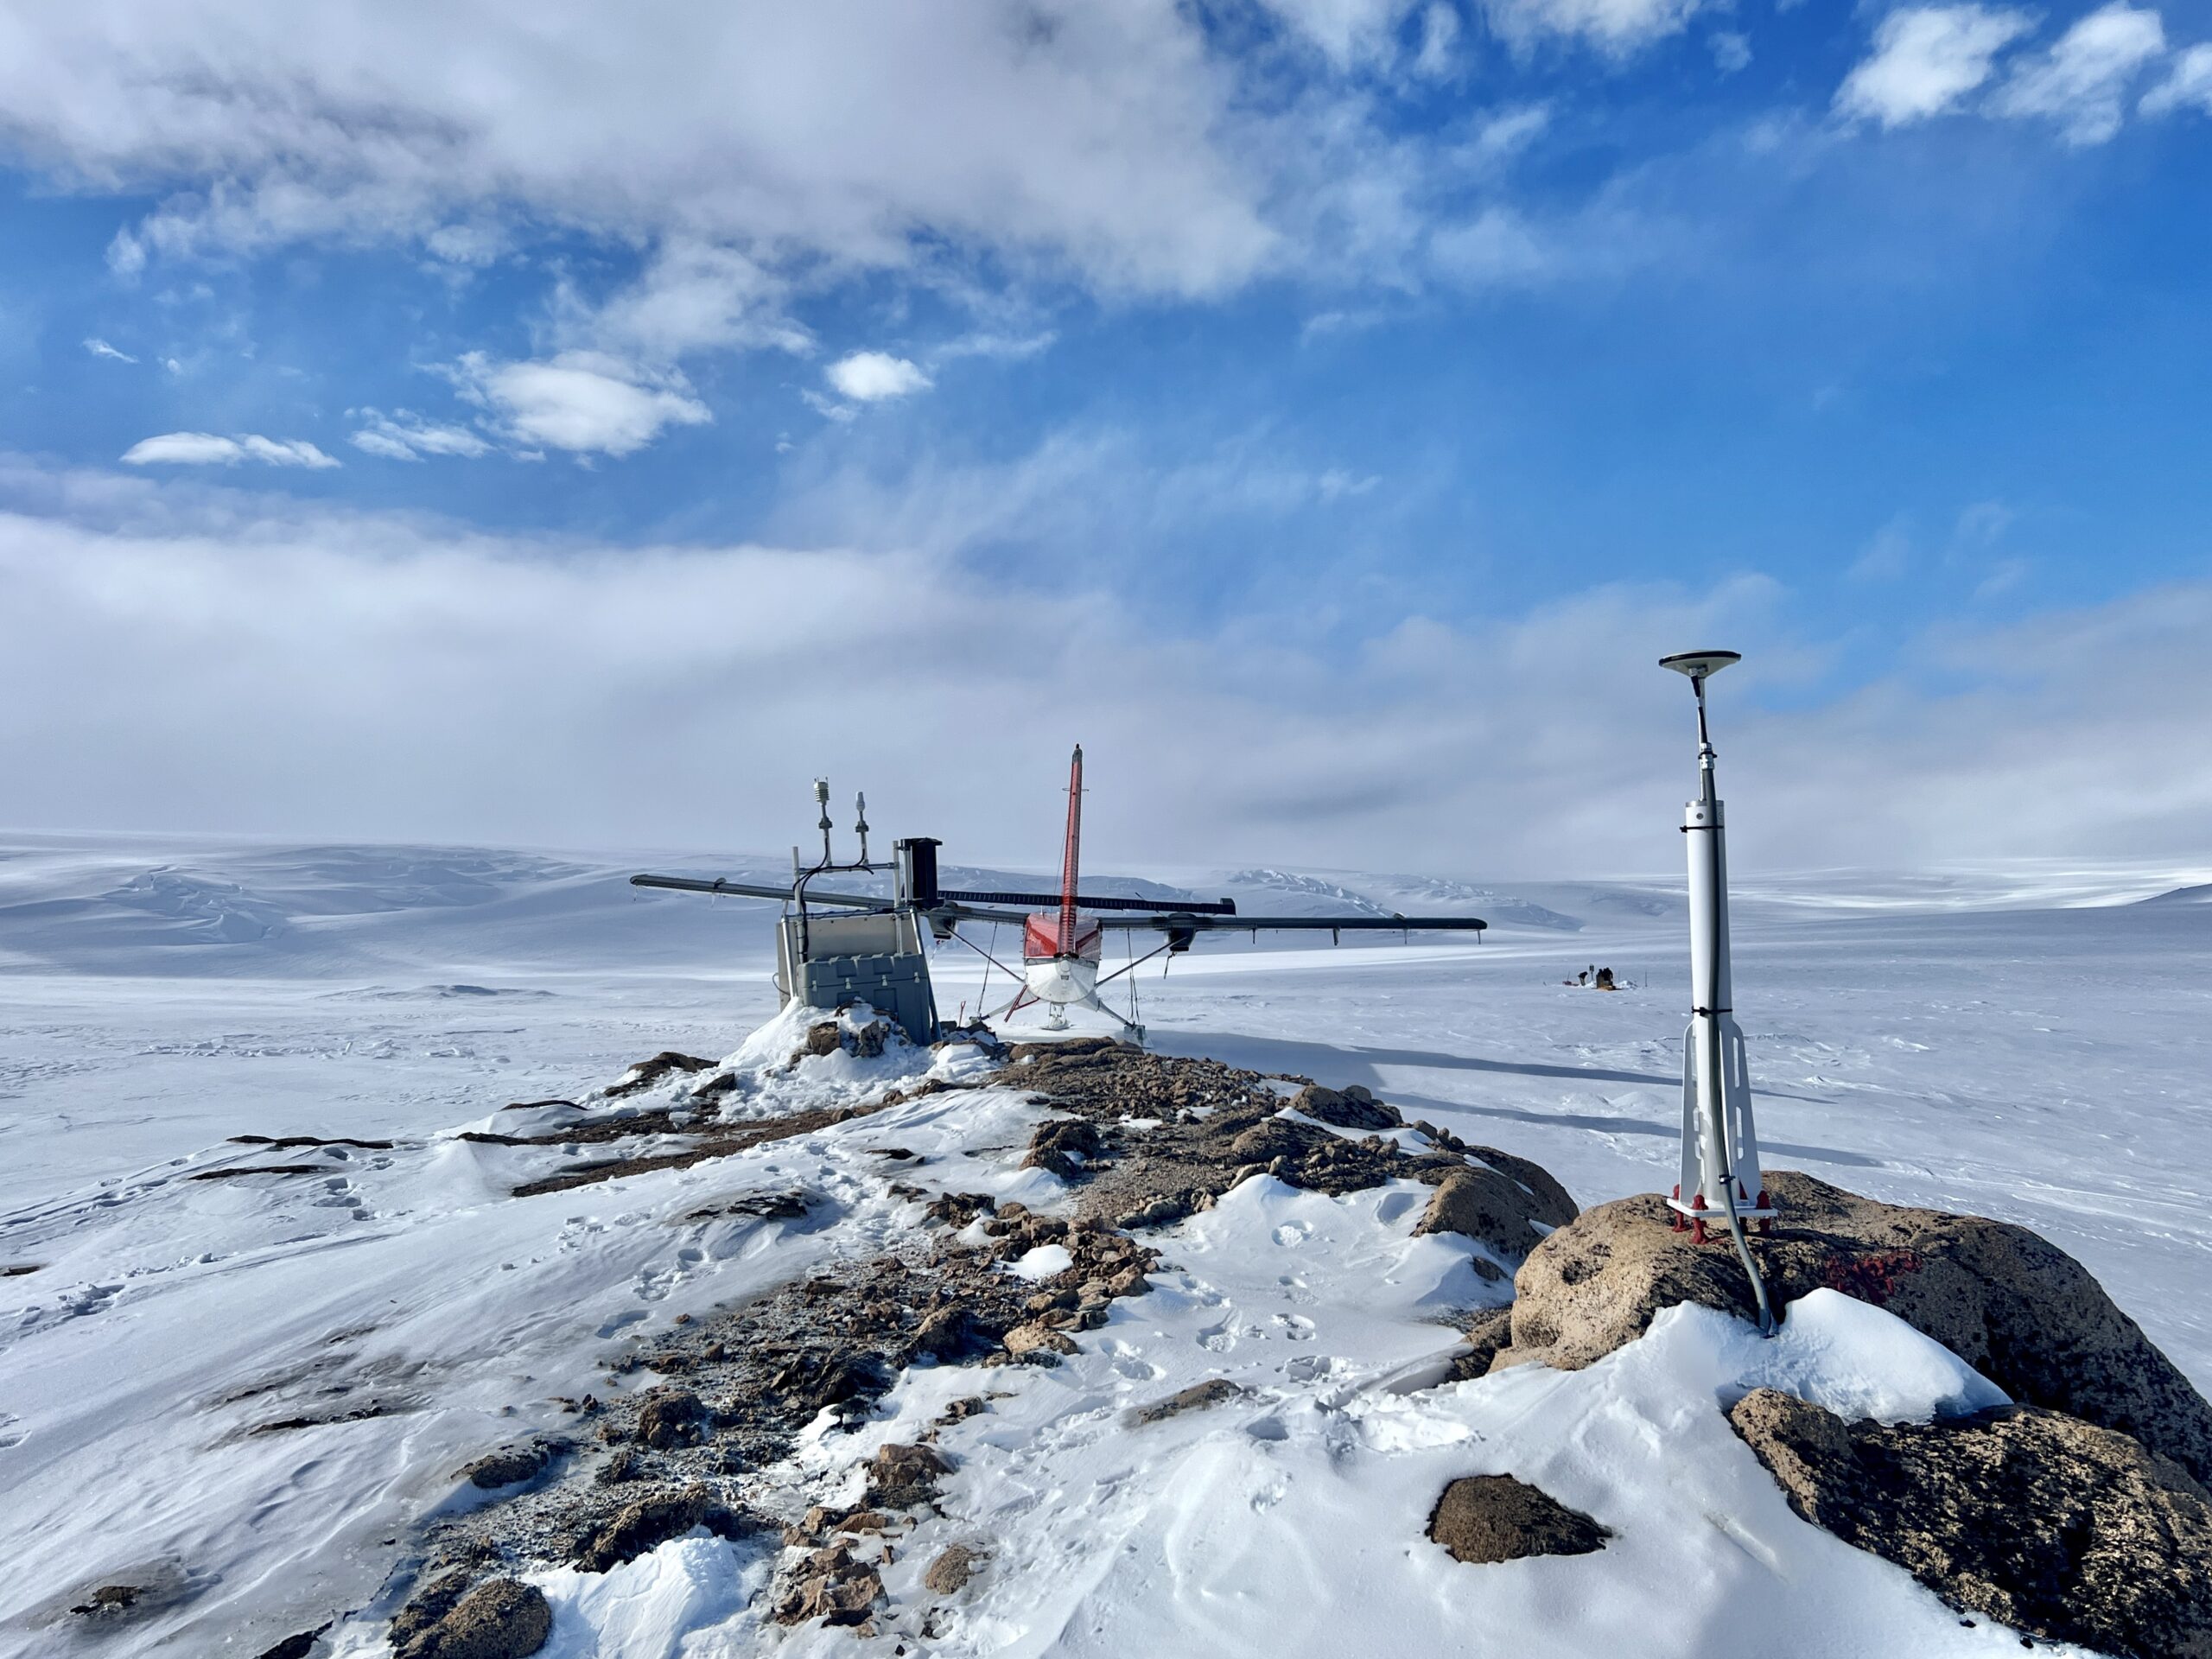 A vast snowy field with some rocks, equipment and a plane in the foreground under blue skies with white clouds.